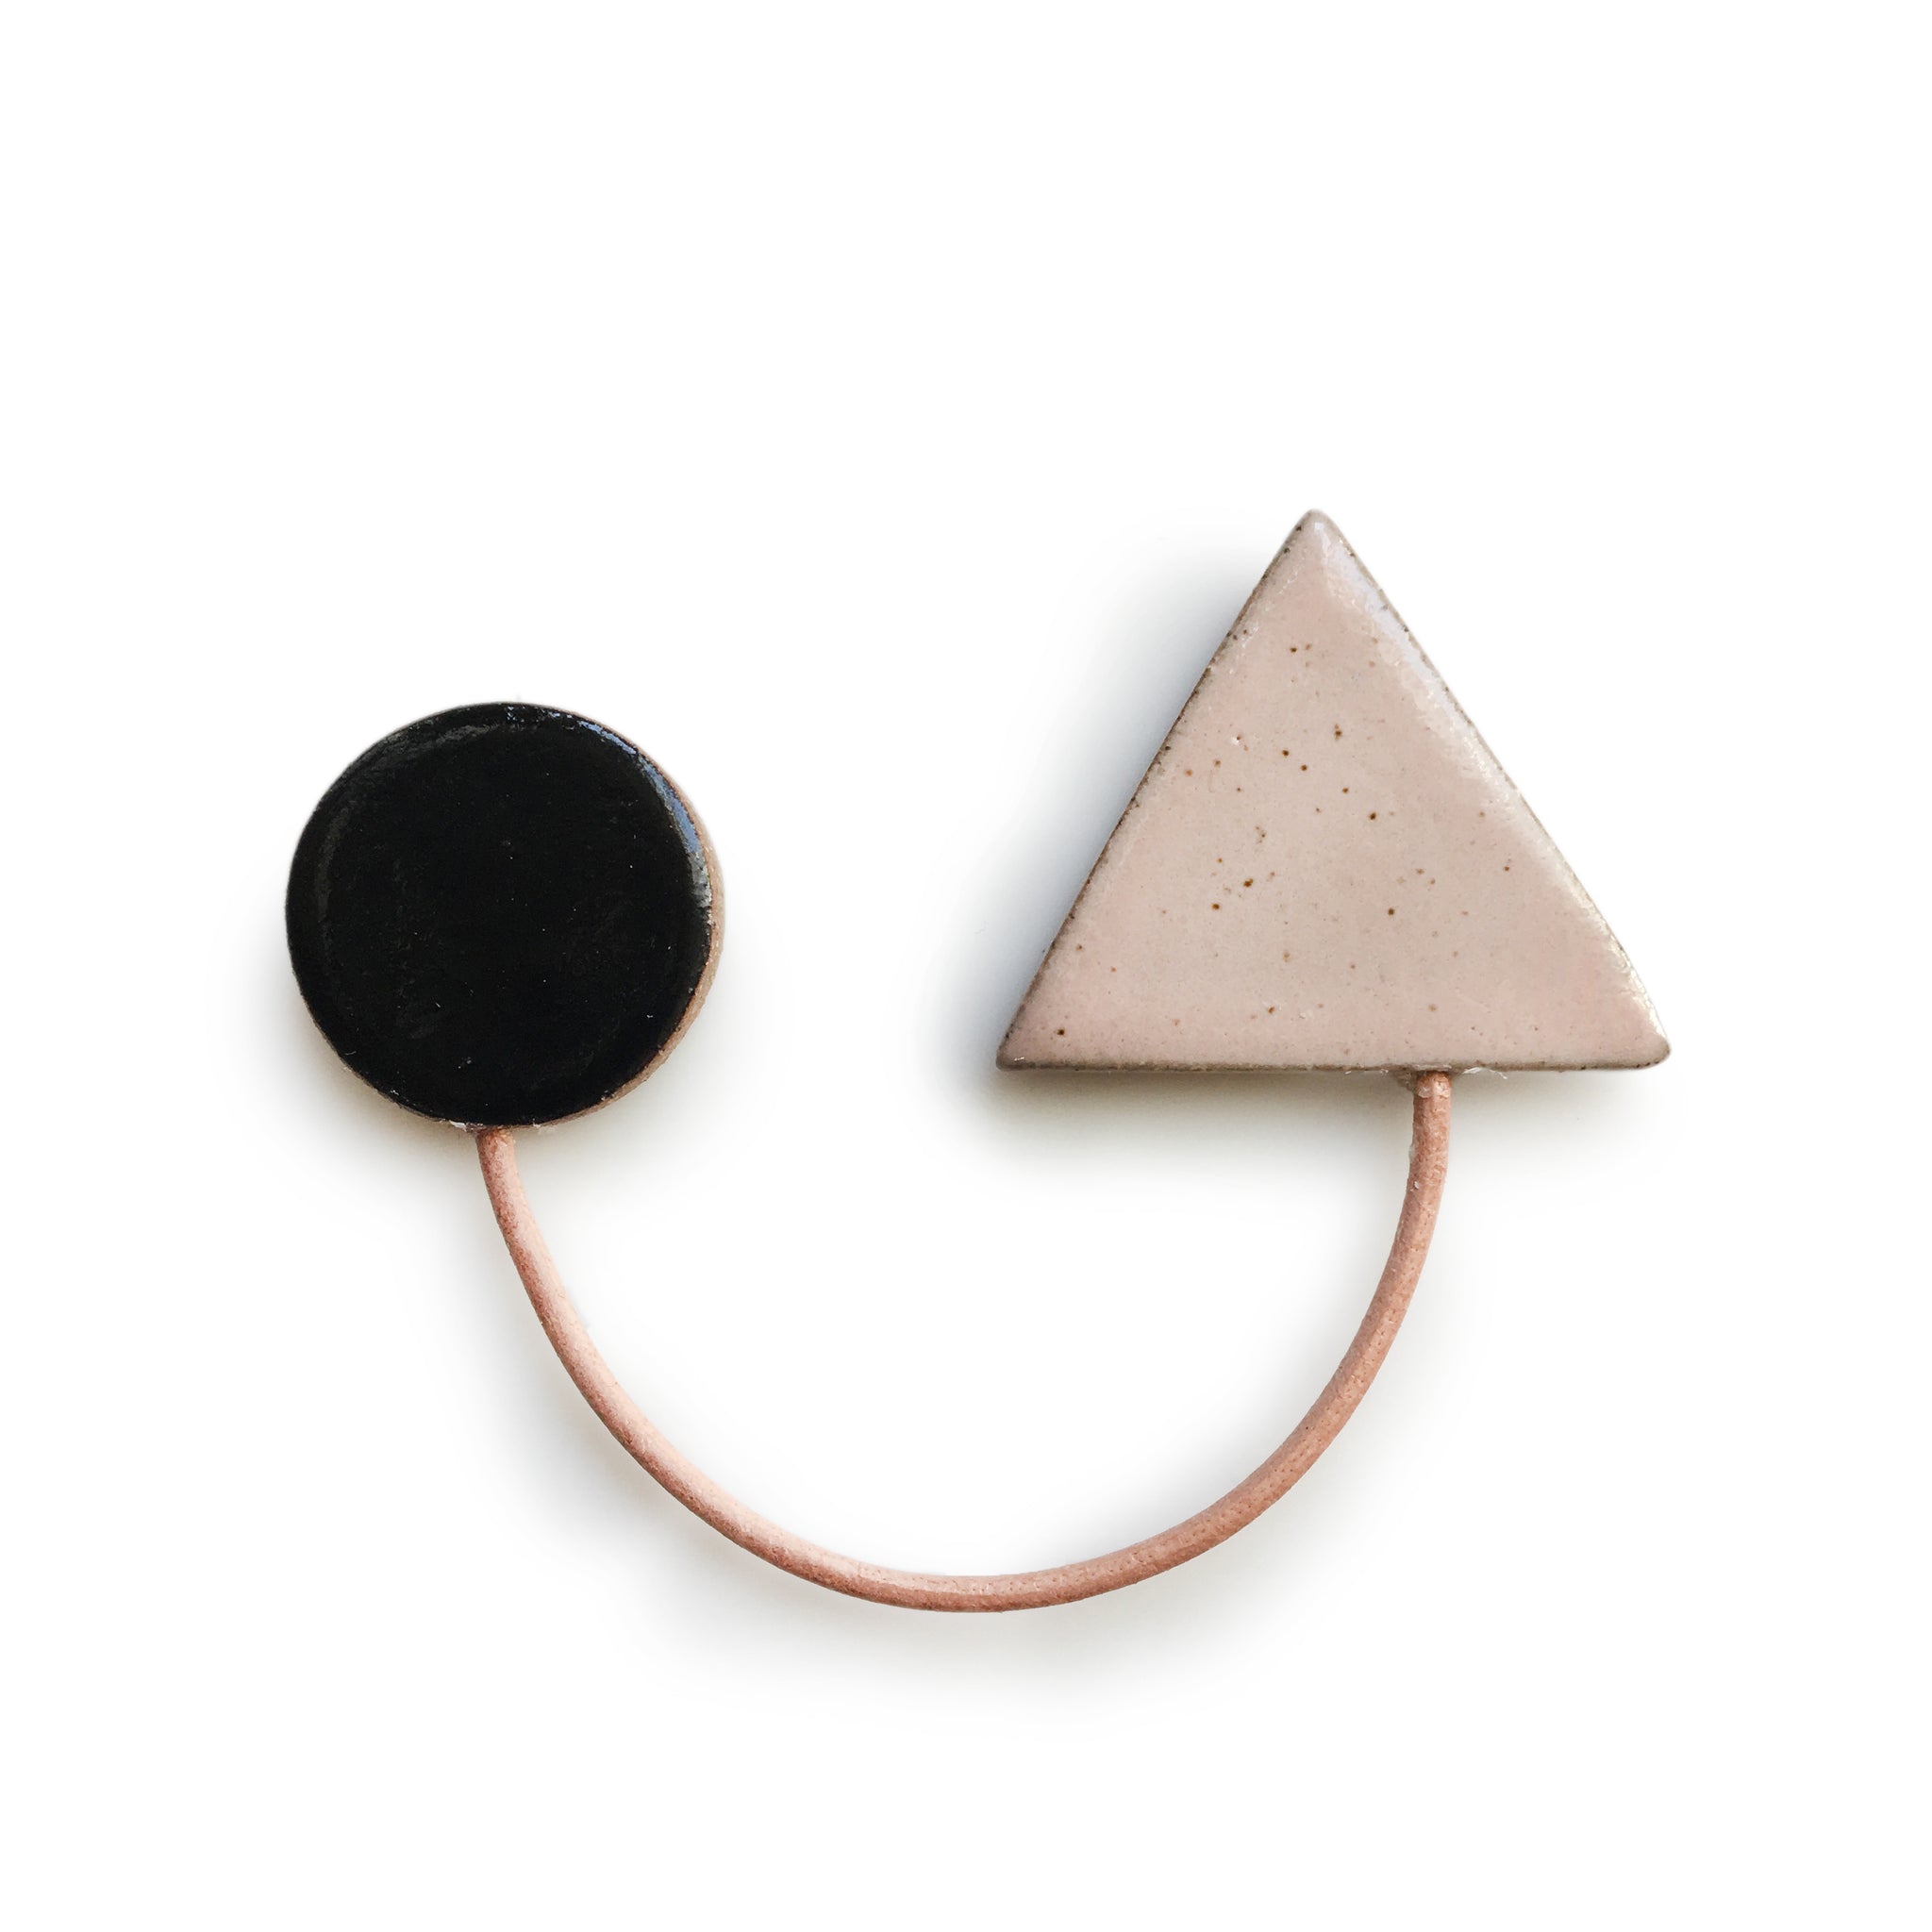 Paired Shapes Brooch: Blush and Black